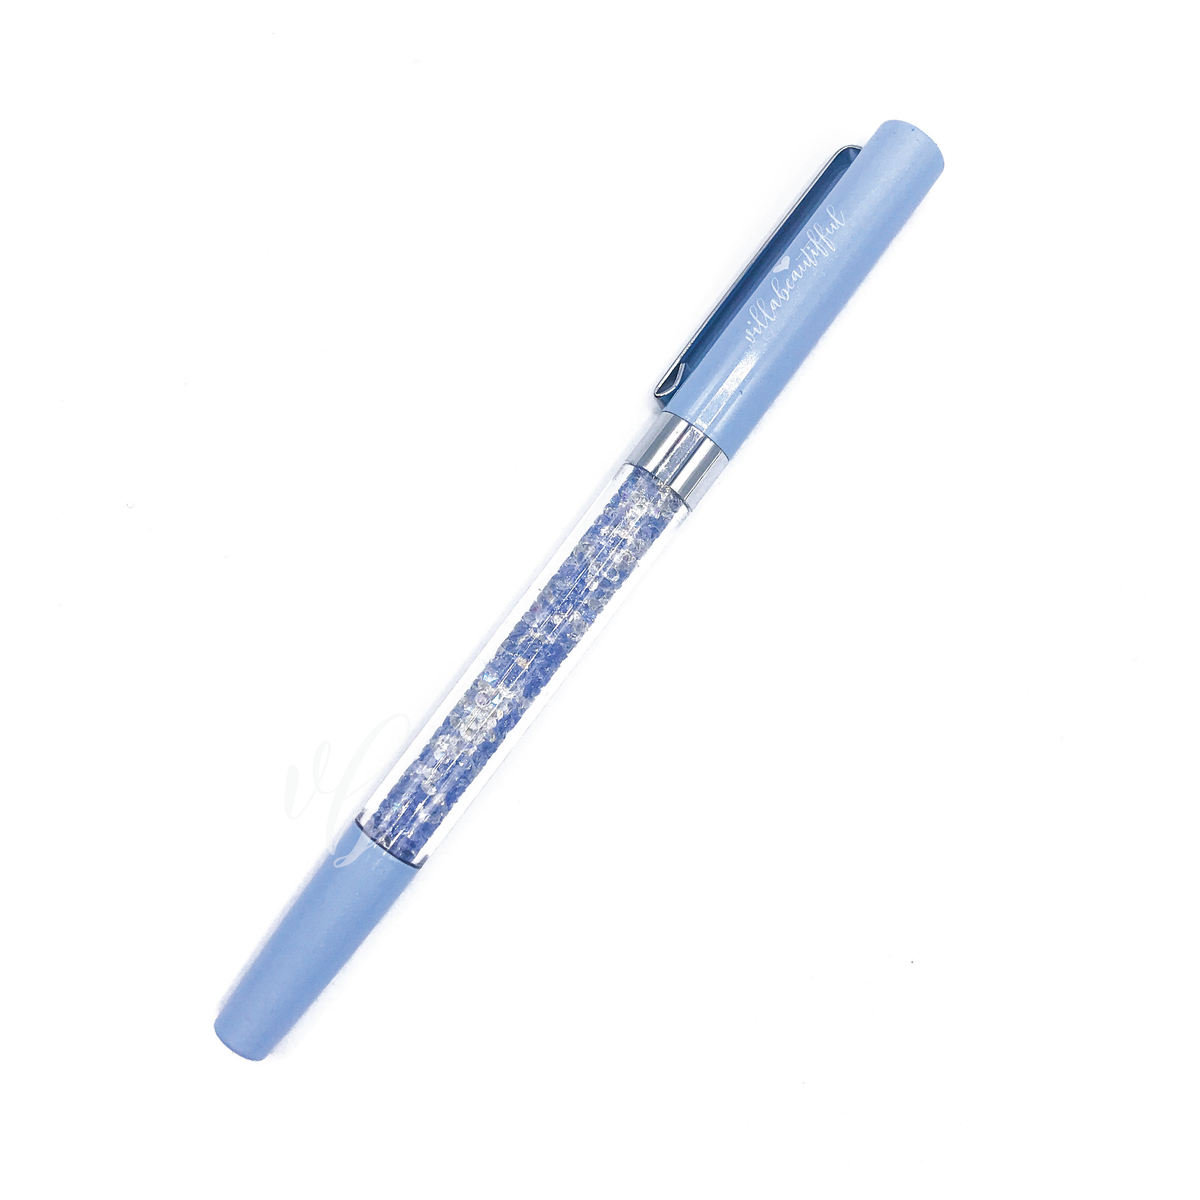 Tranquil Crystal VBPen | limited